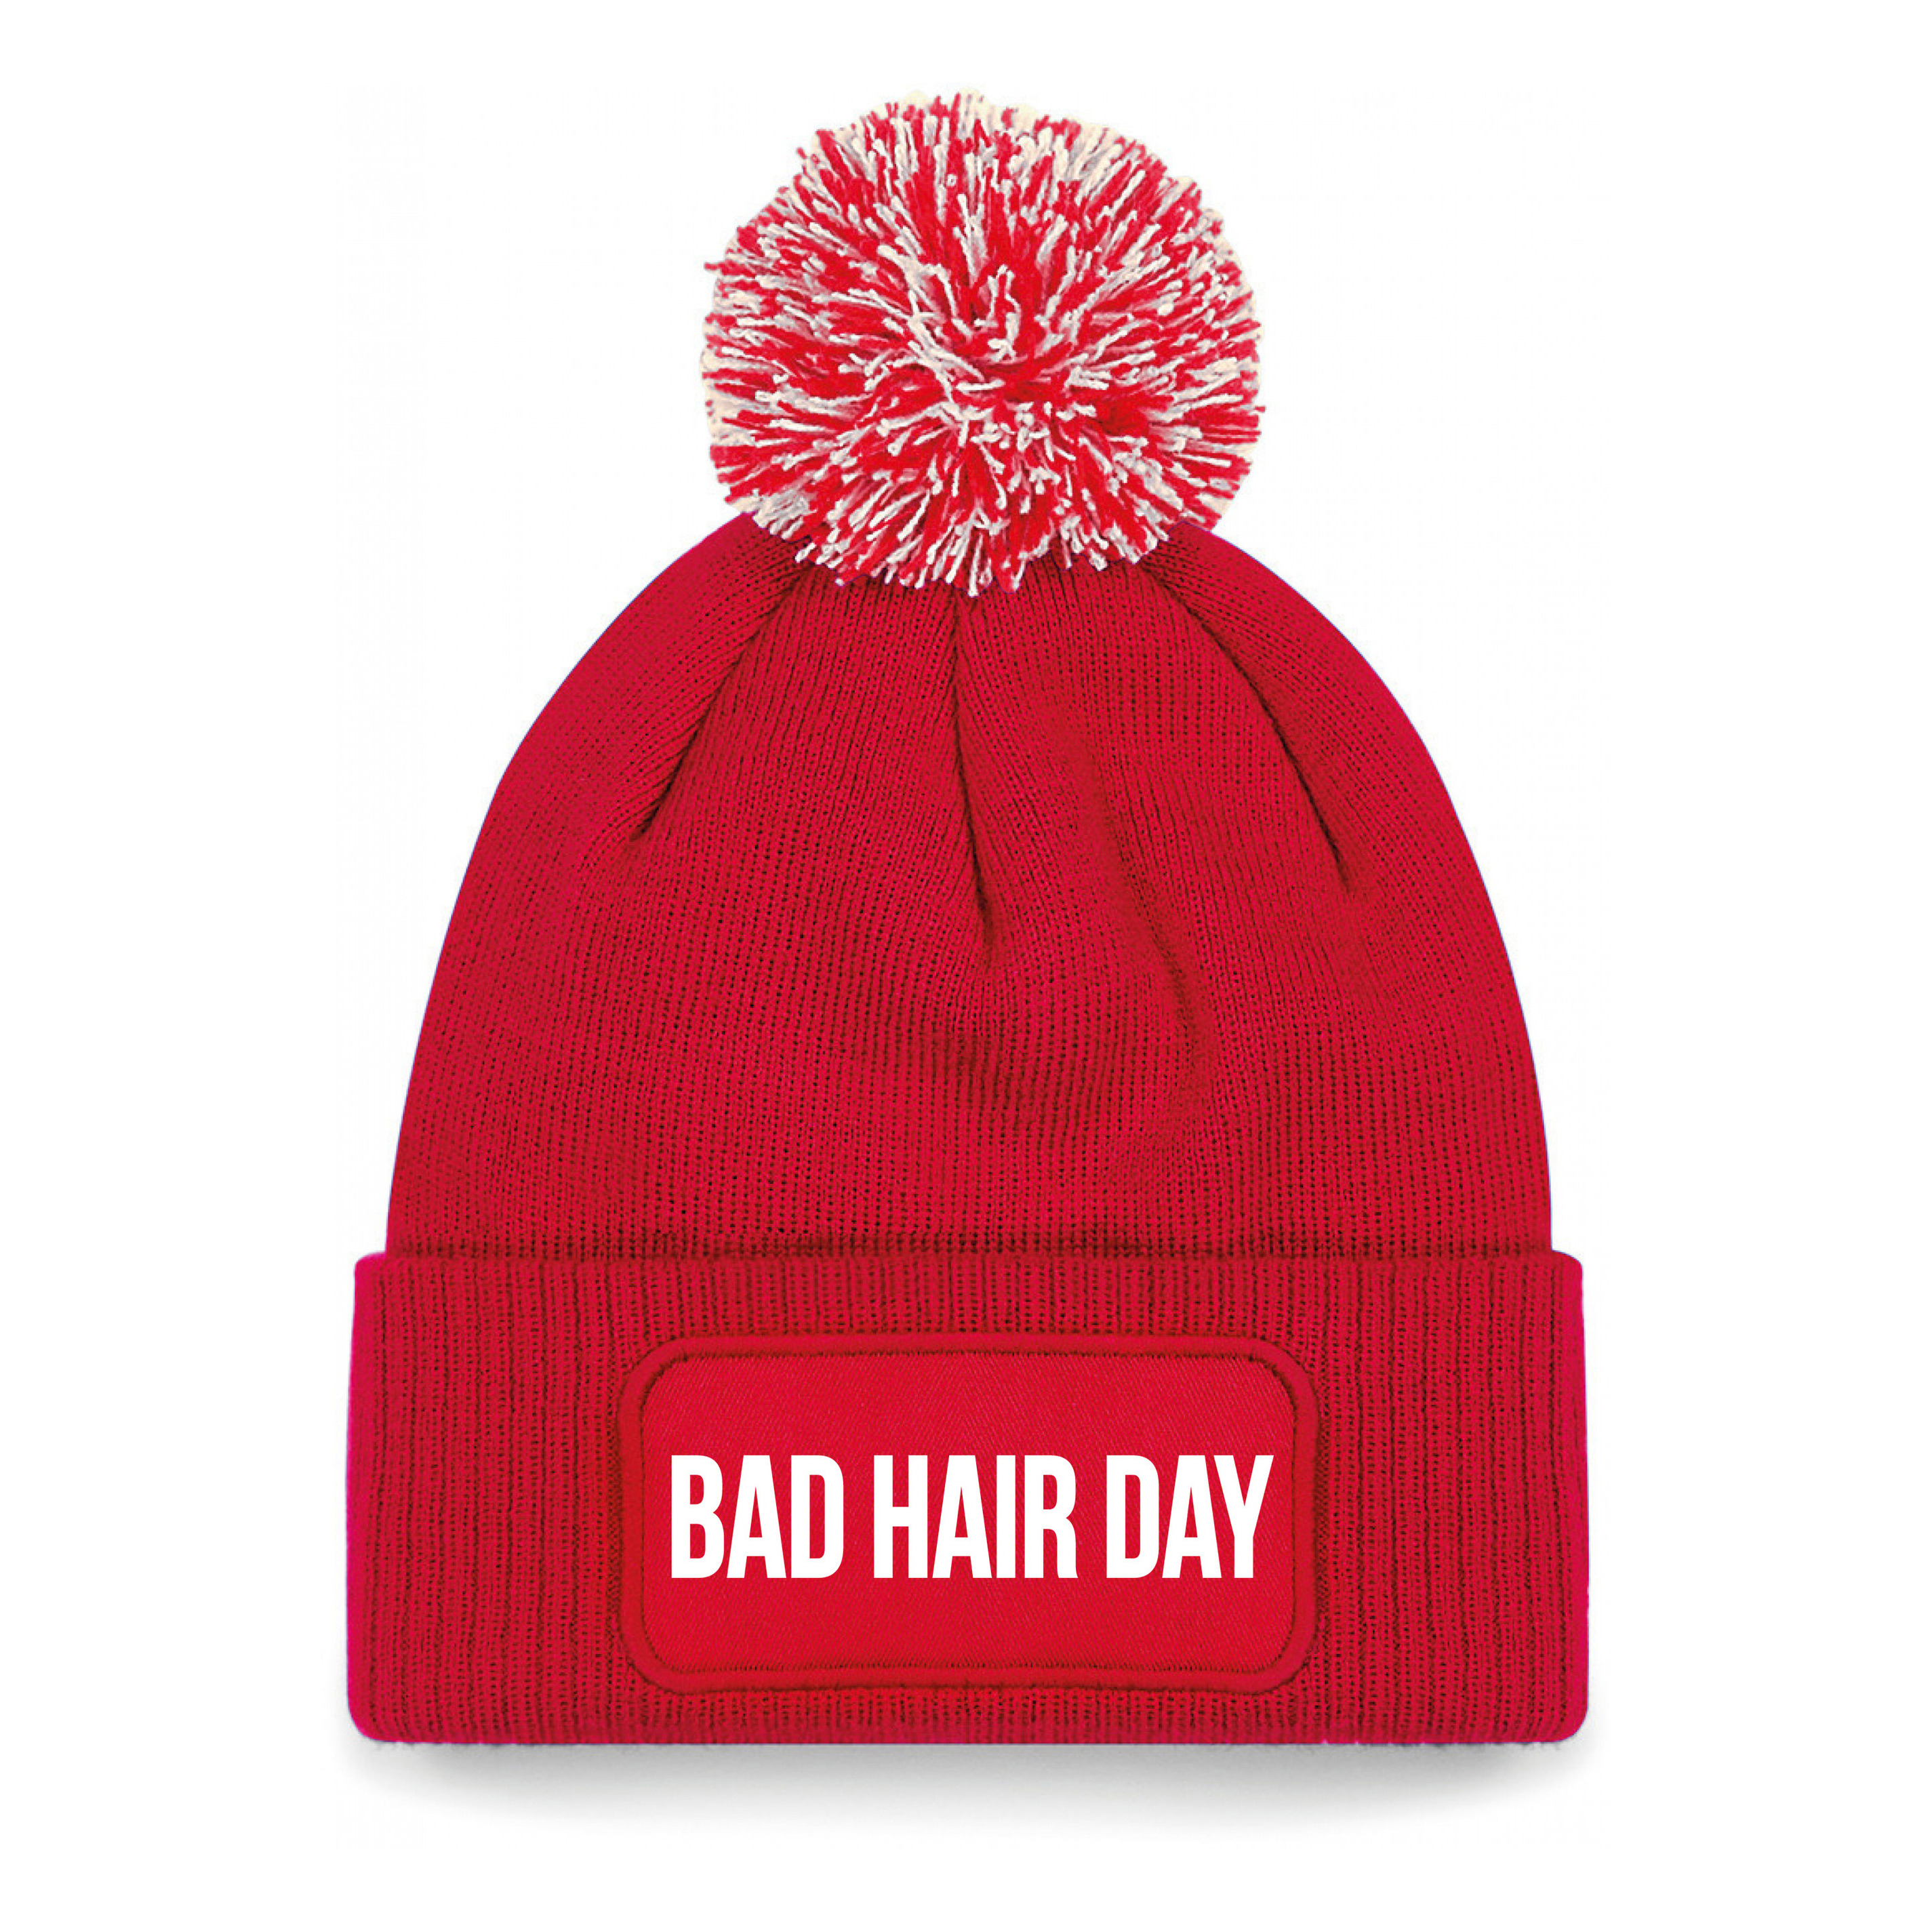 Bad hair day muts met pompon unisex one size Rood